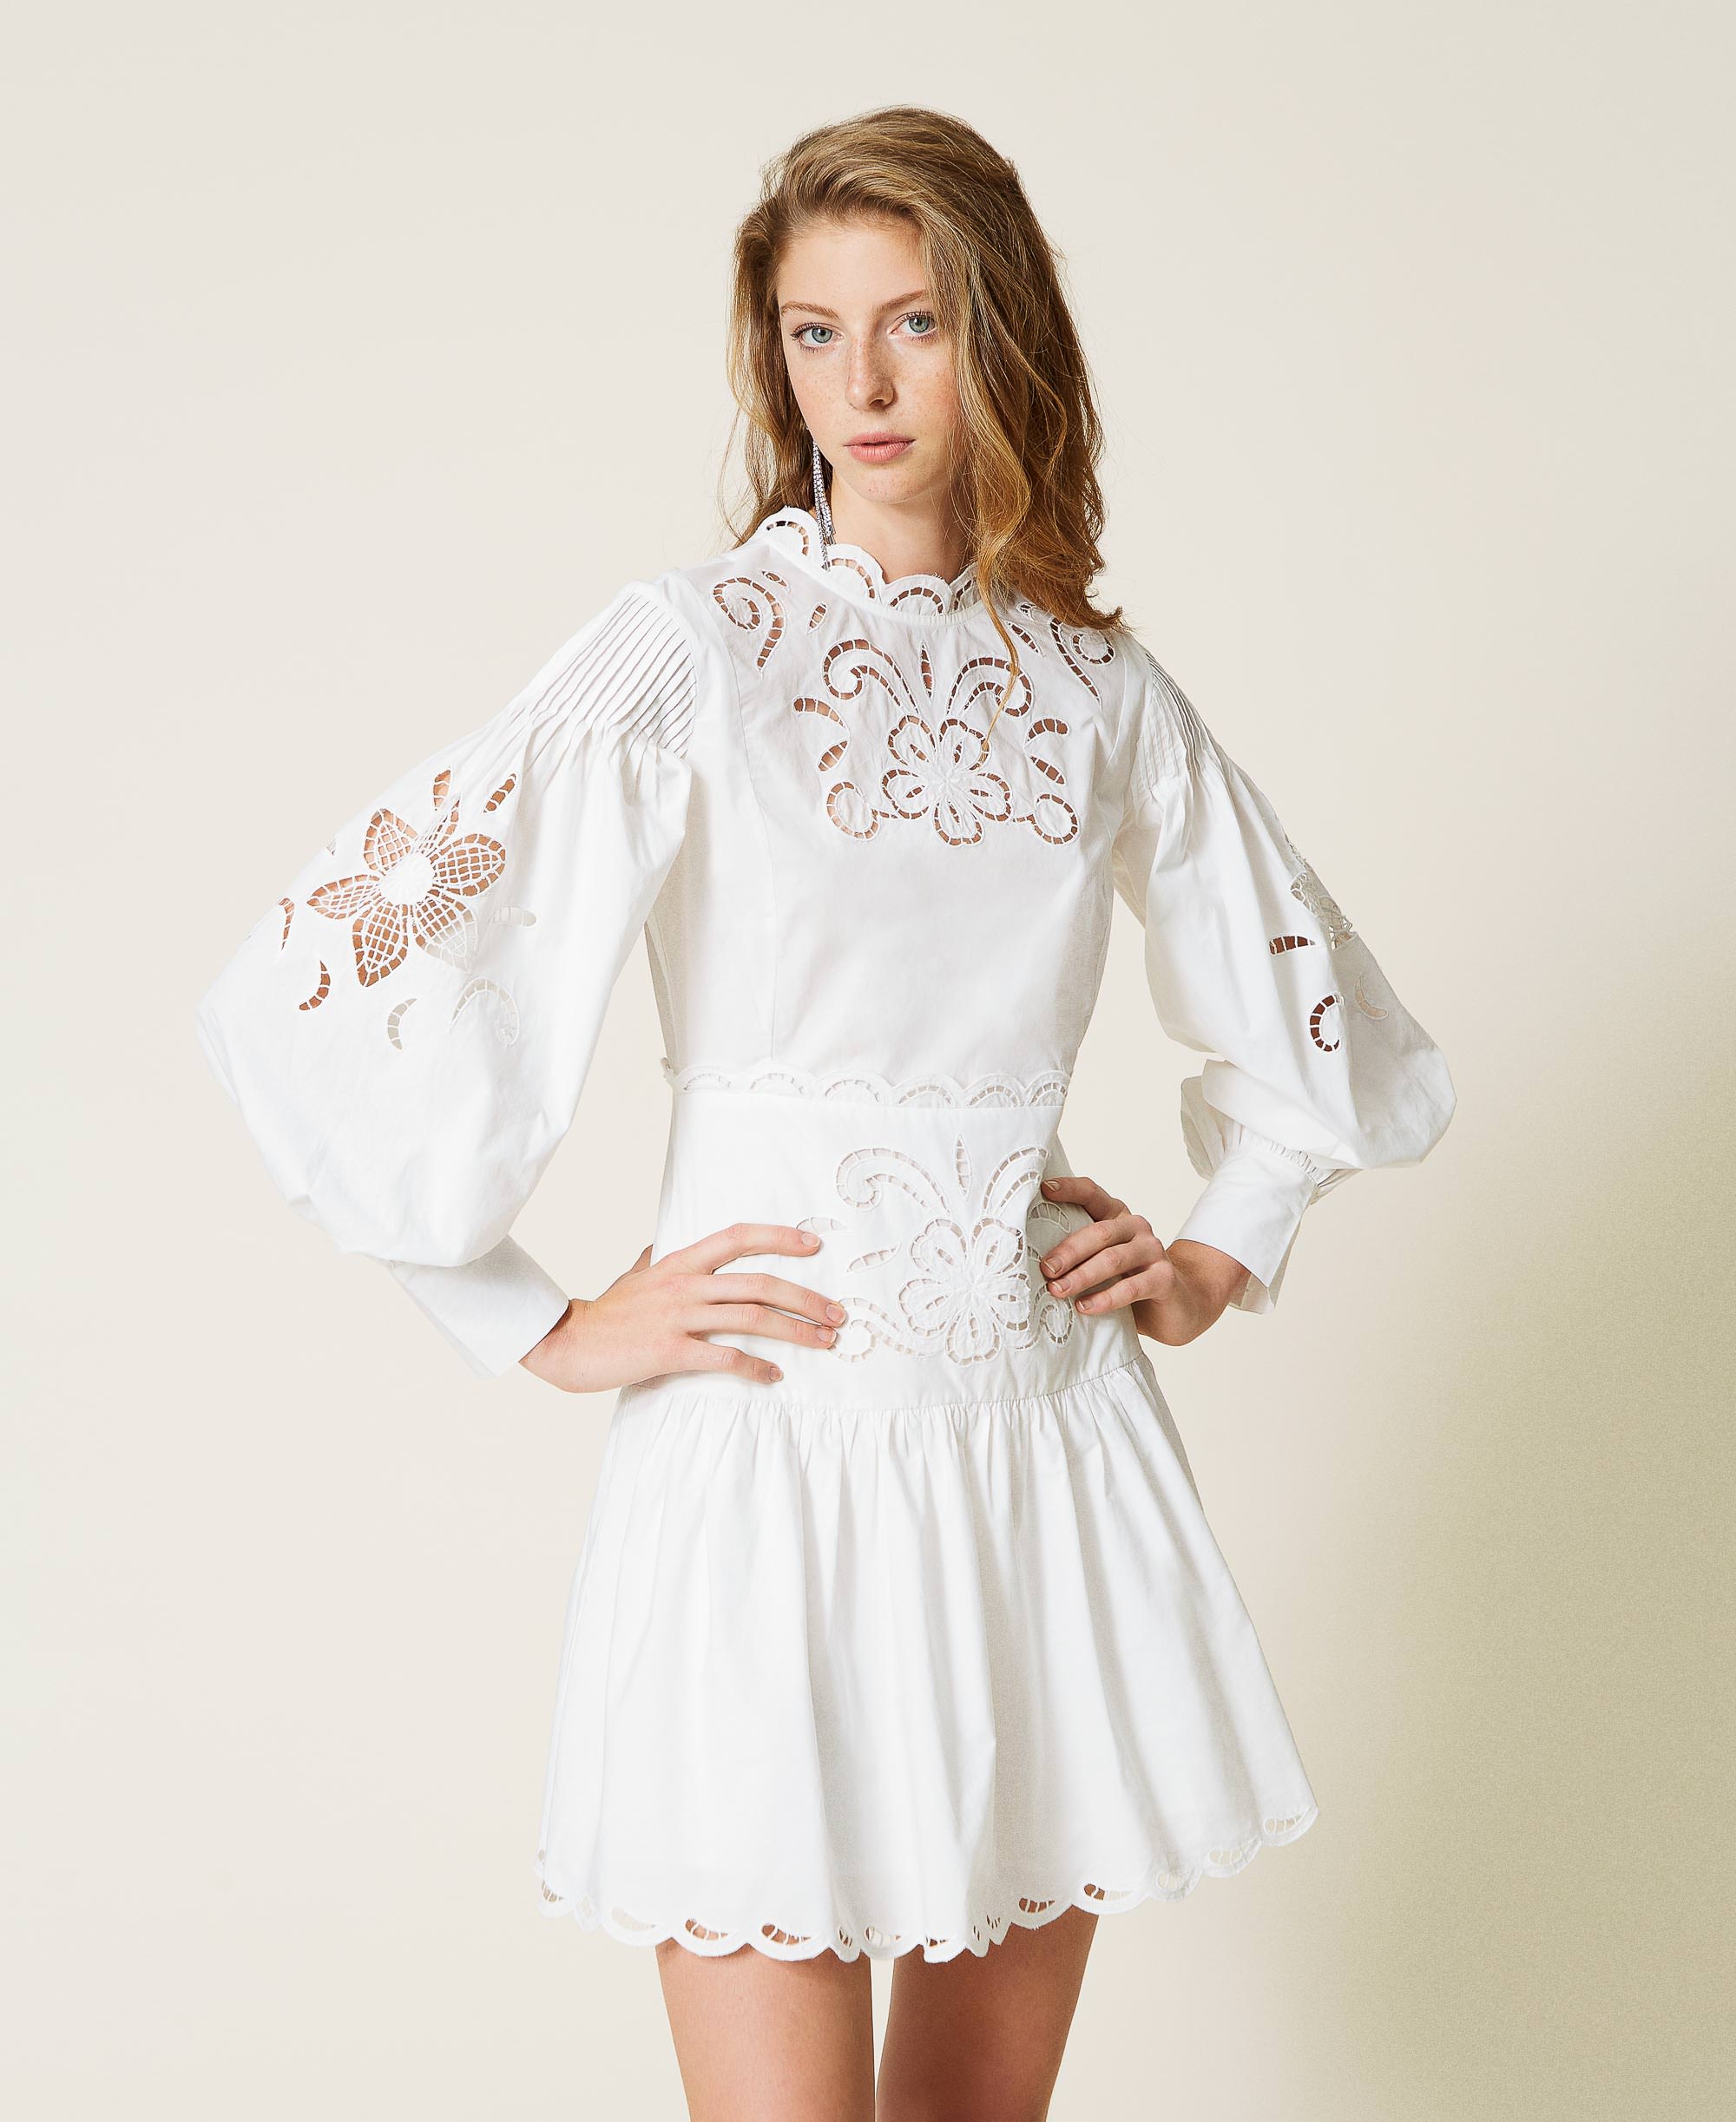 Muslin dress with hemstitch embroidery ...